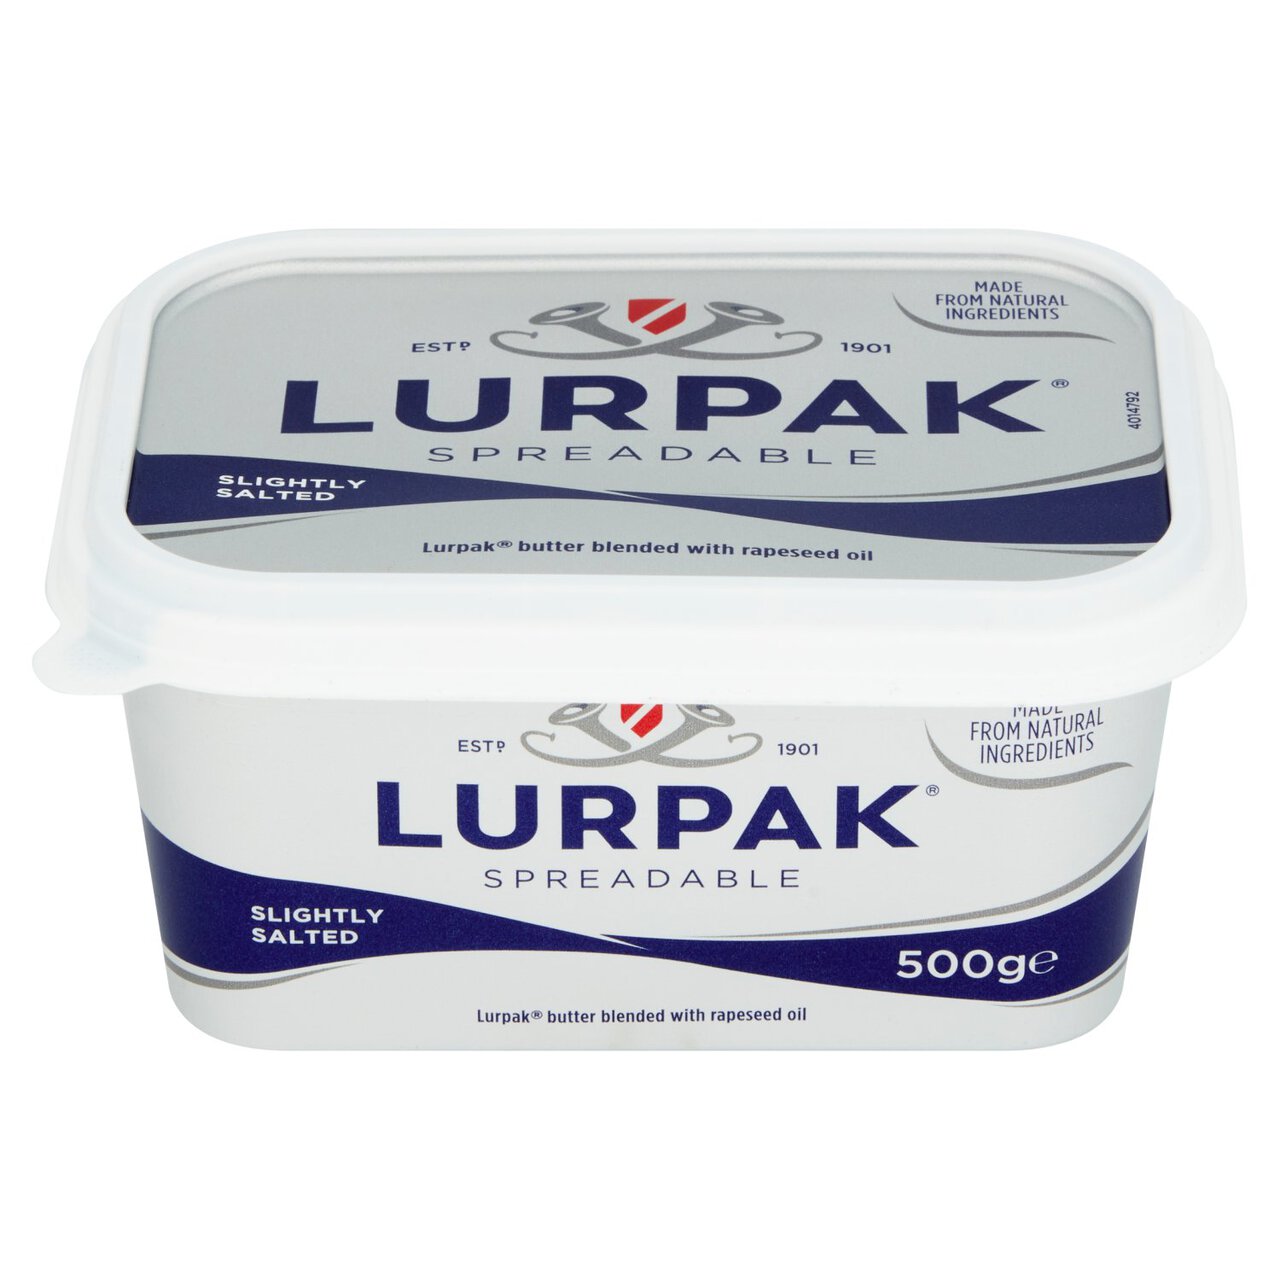 Lurpak Slightly Salted Spreadable Blend of Butter and Rapeseed Oil 500g